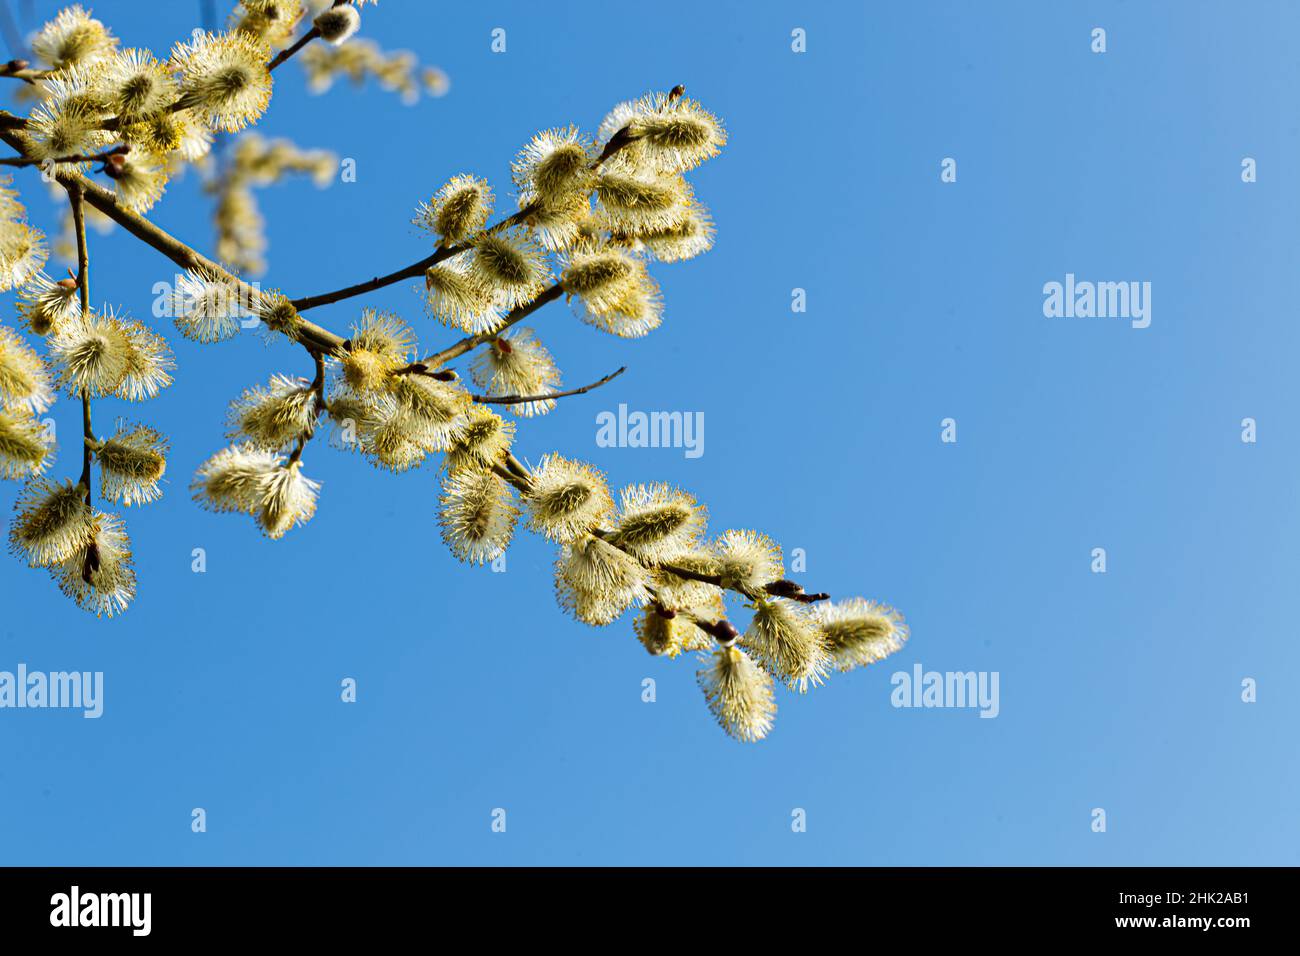 blossoming blooming blooming   catkin or ament on a branch of a spring tree against a blue sky Stock Photo